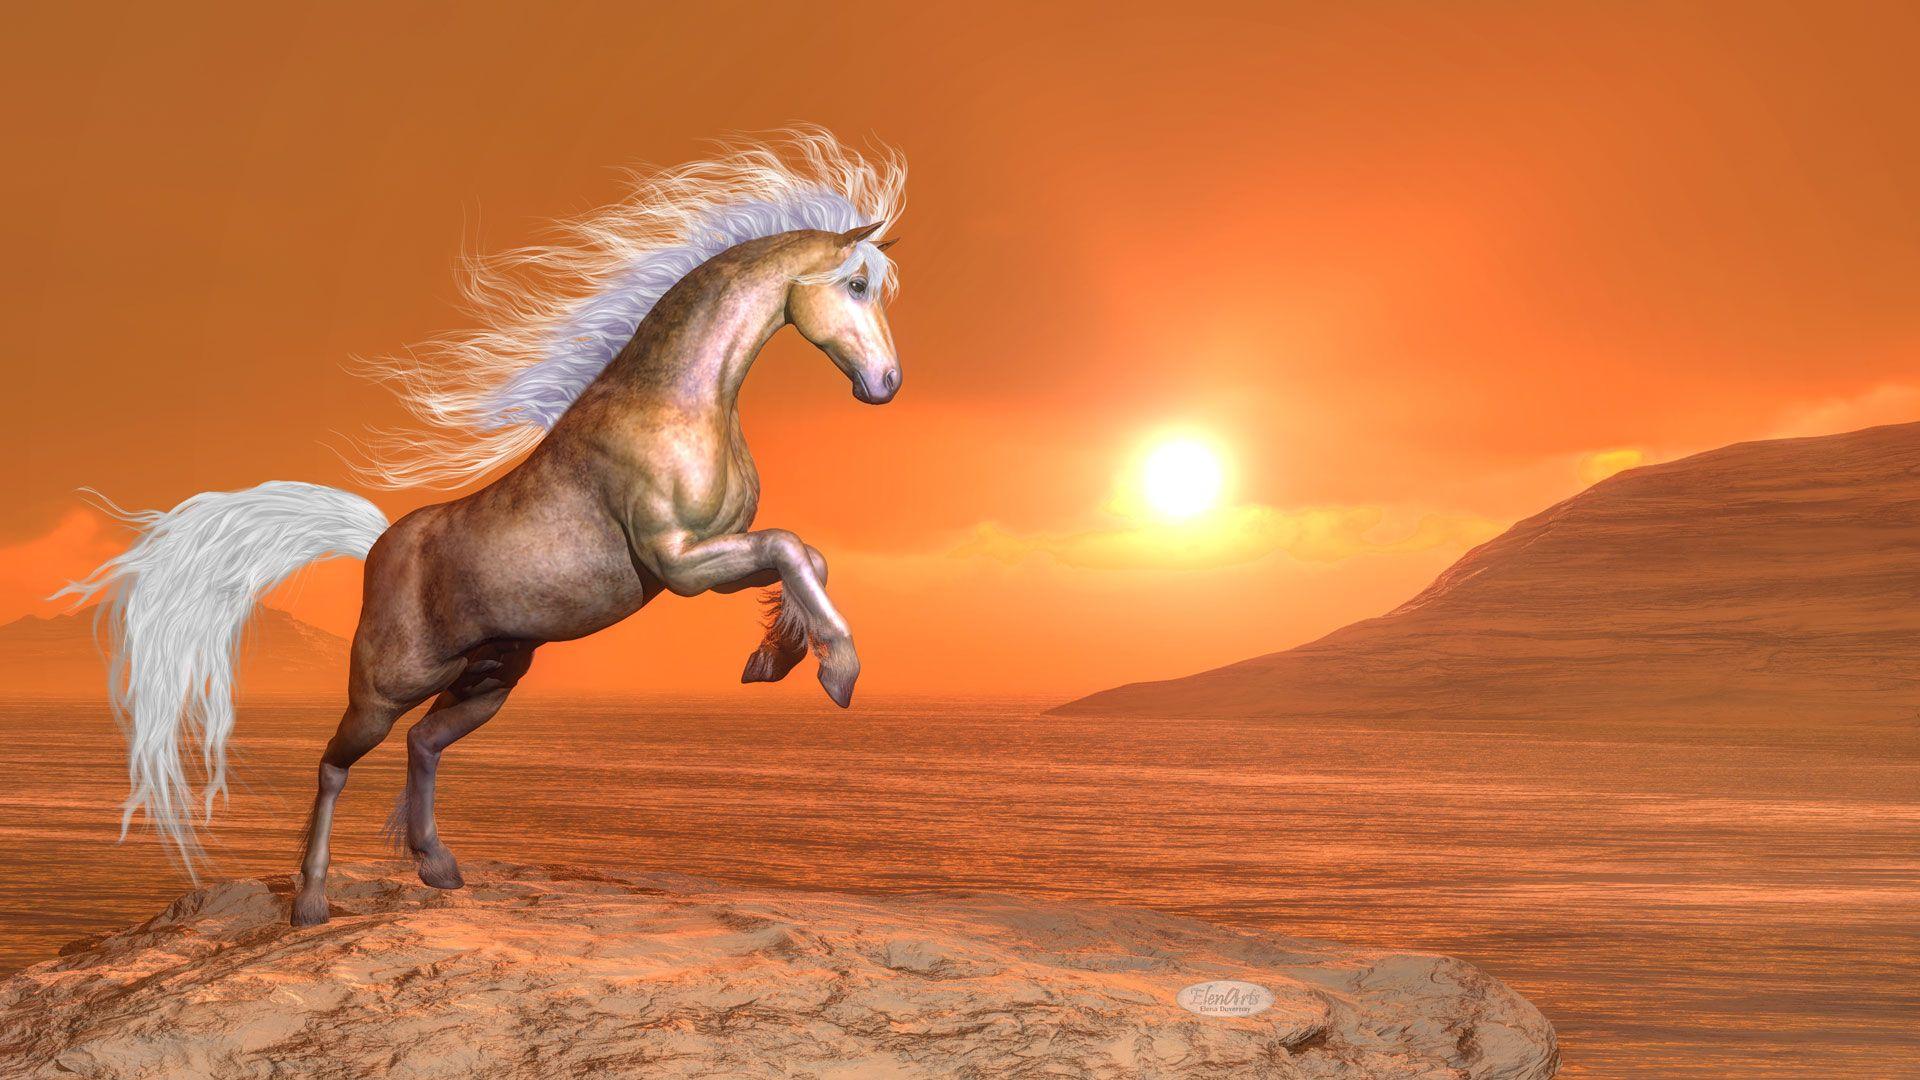 Clear brown horse rearing by orange sunset render